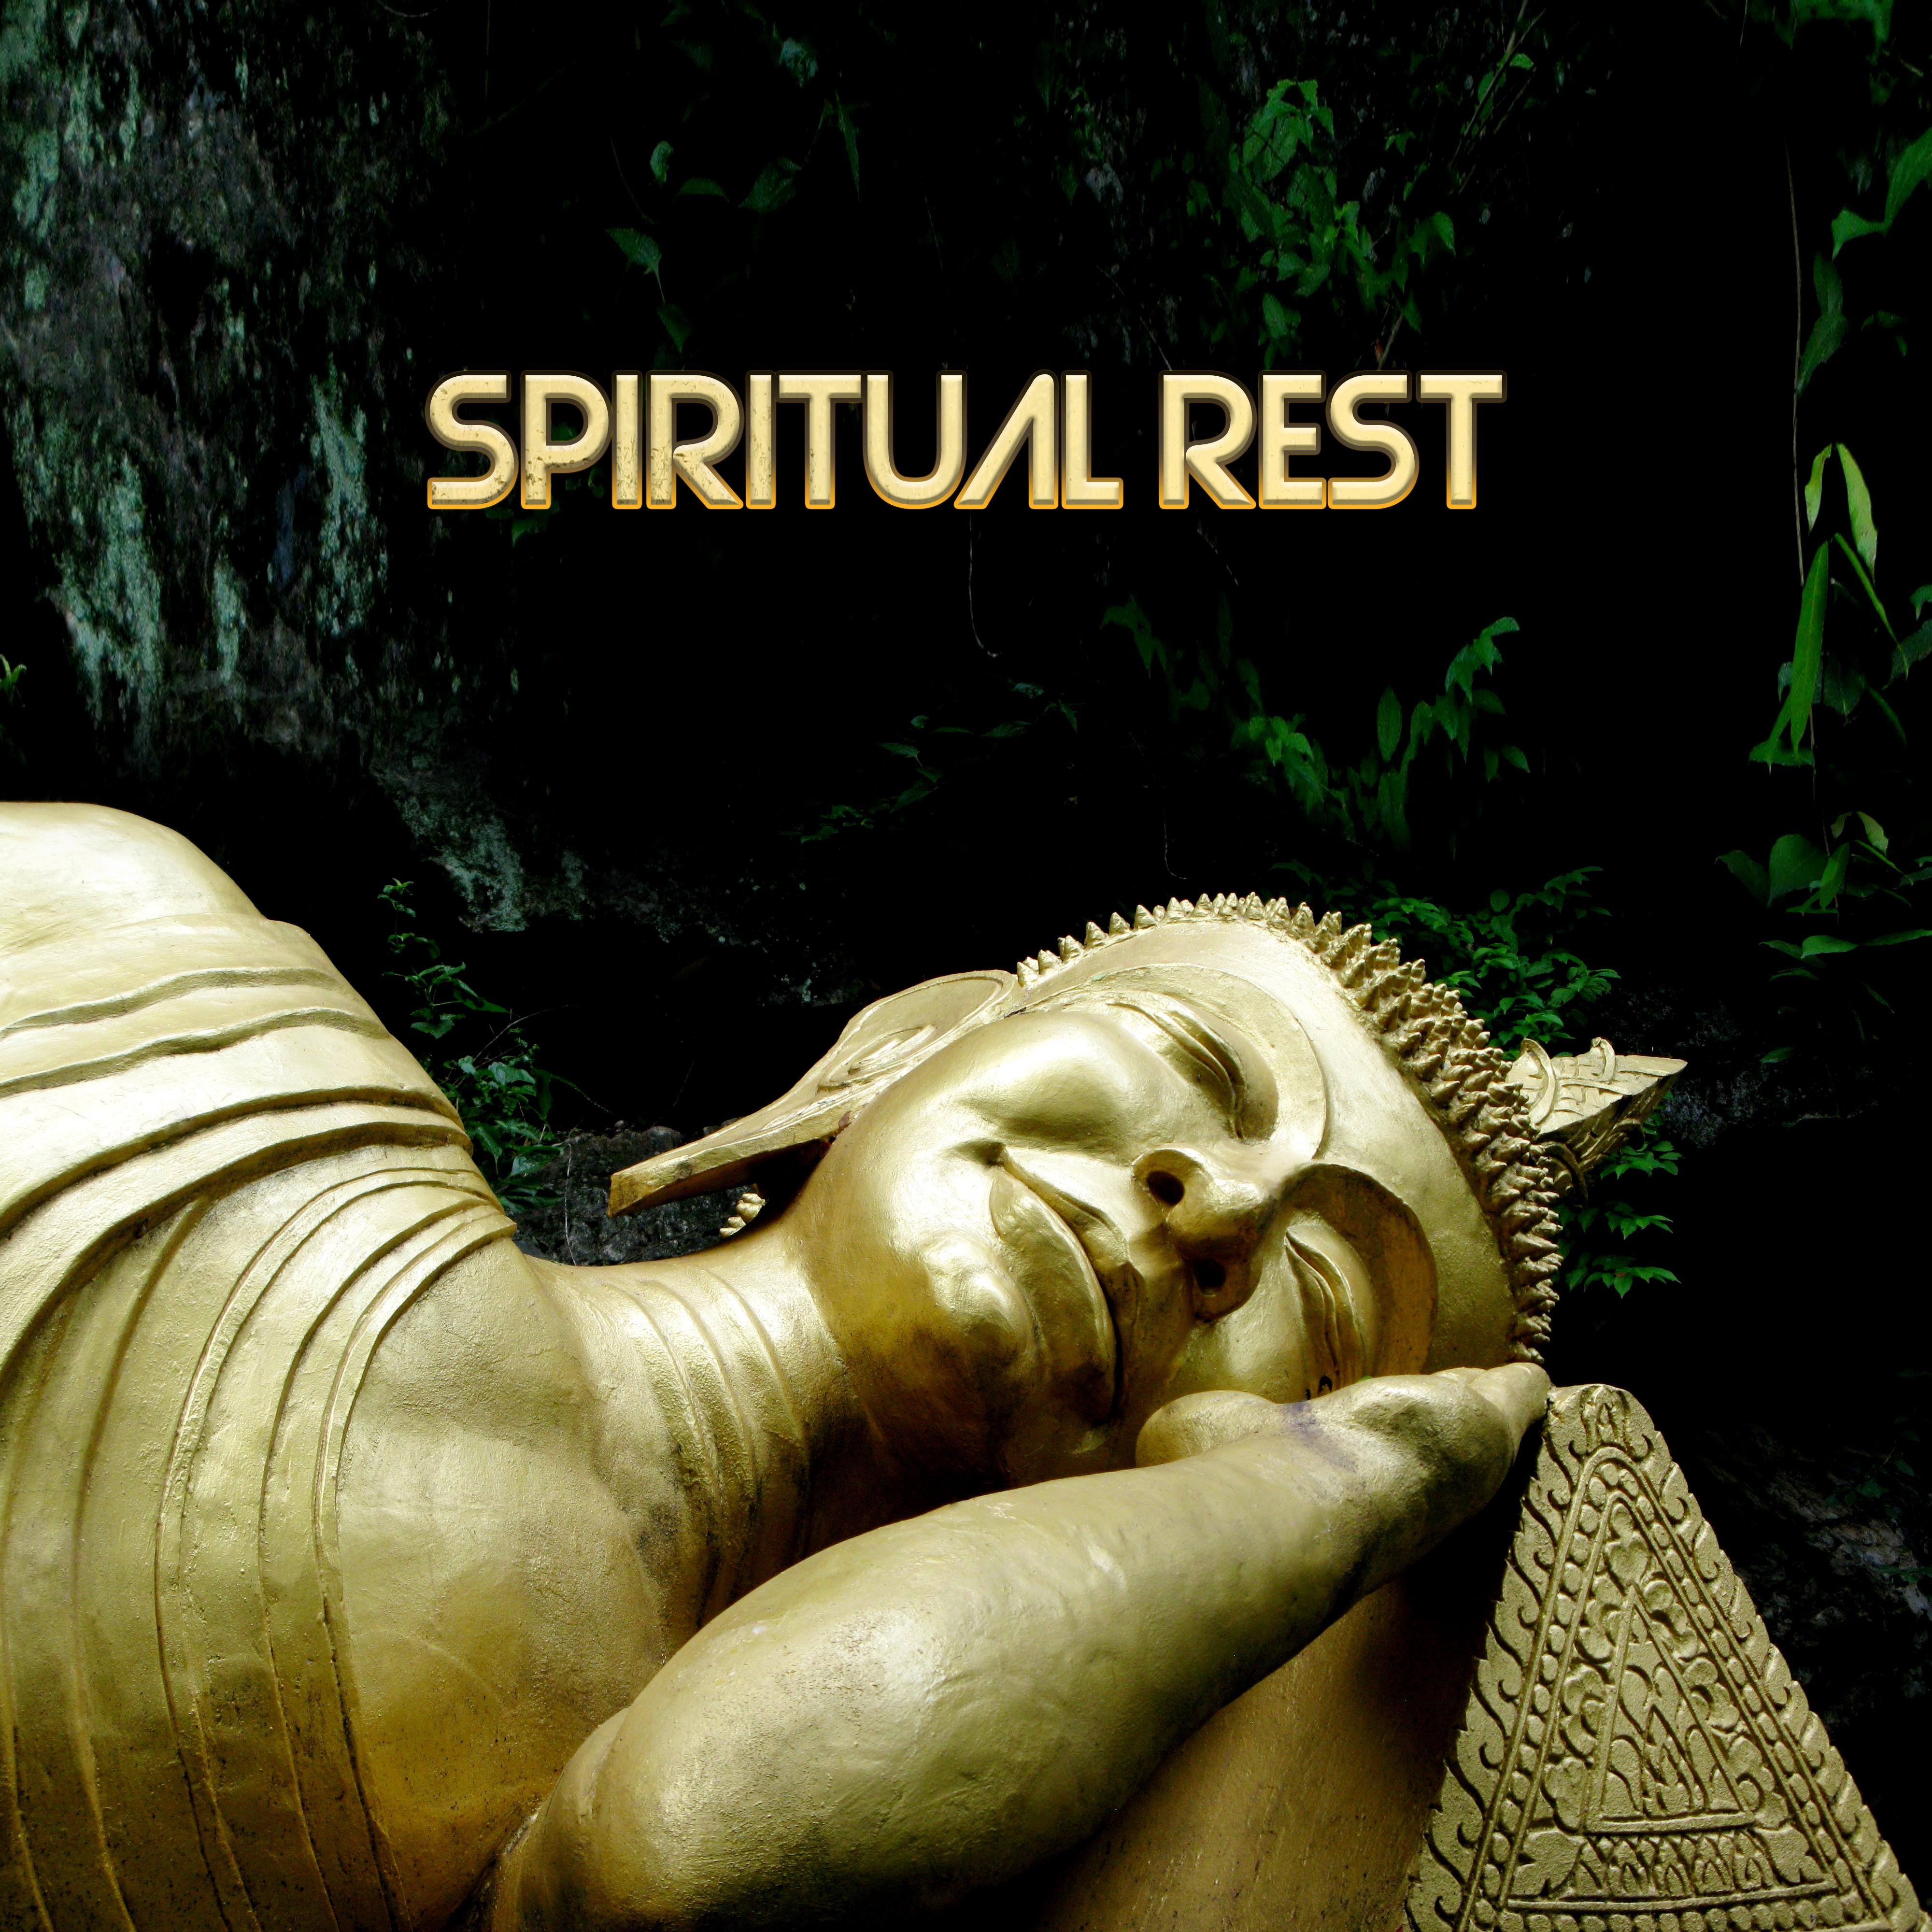 Spiritual Rest - Buddhist, Yoga Holidays, Relaxation Meditation, Healing Therapy New Age Music for Reduce Stress, Mindfulness, Reiki Music